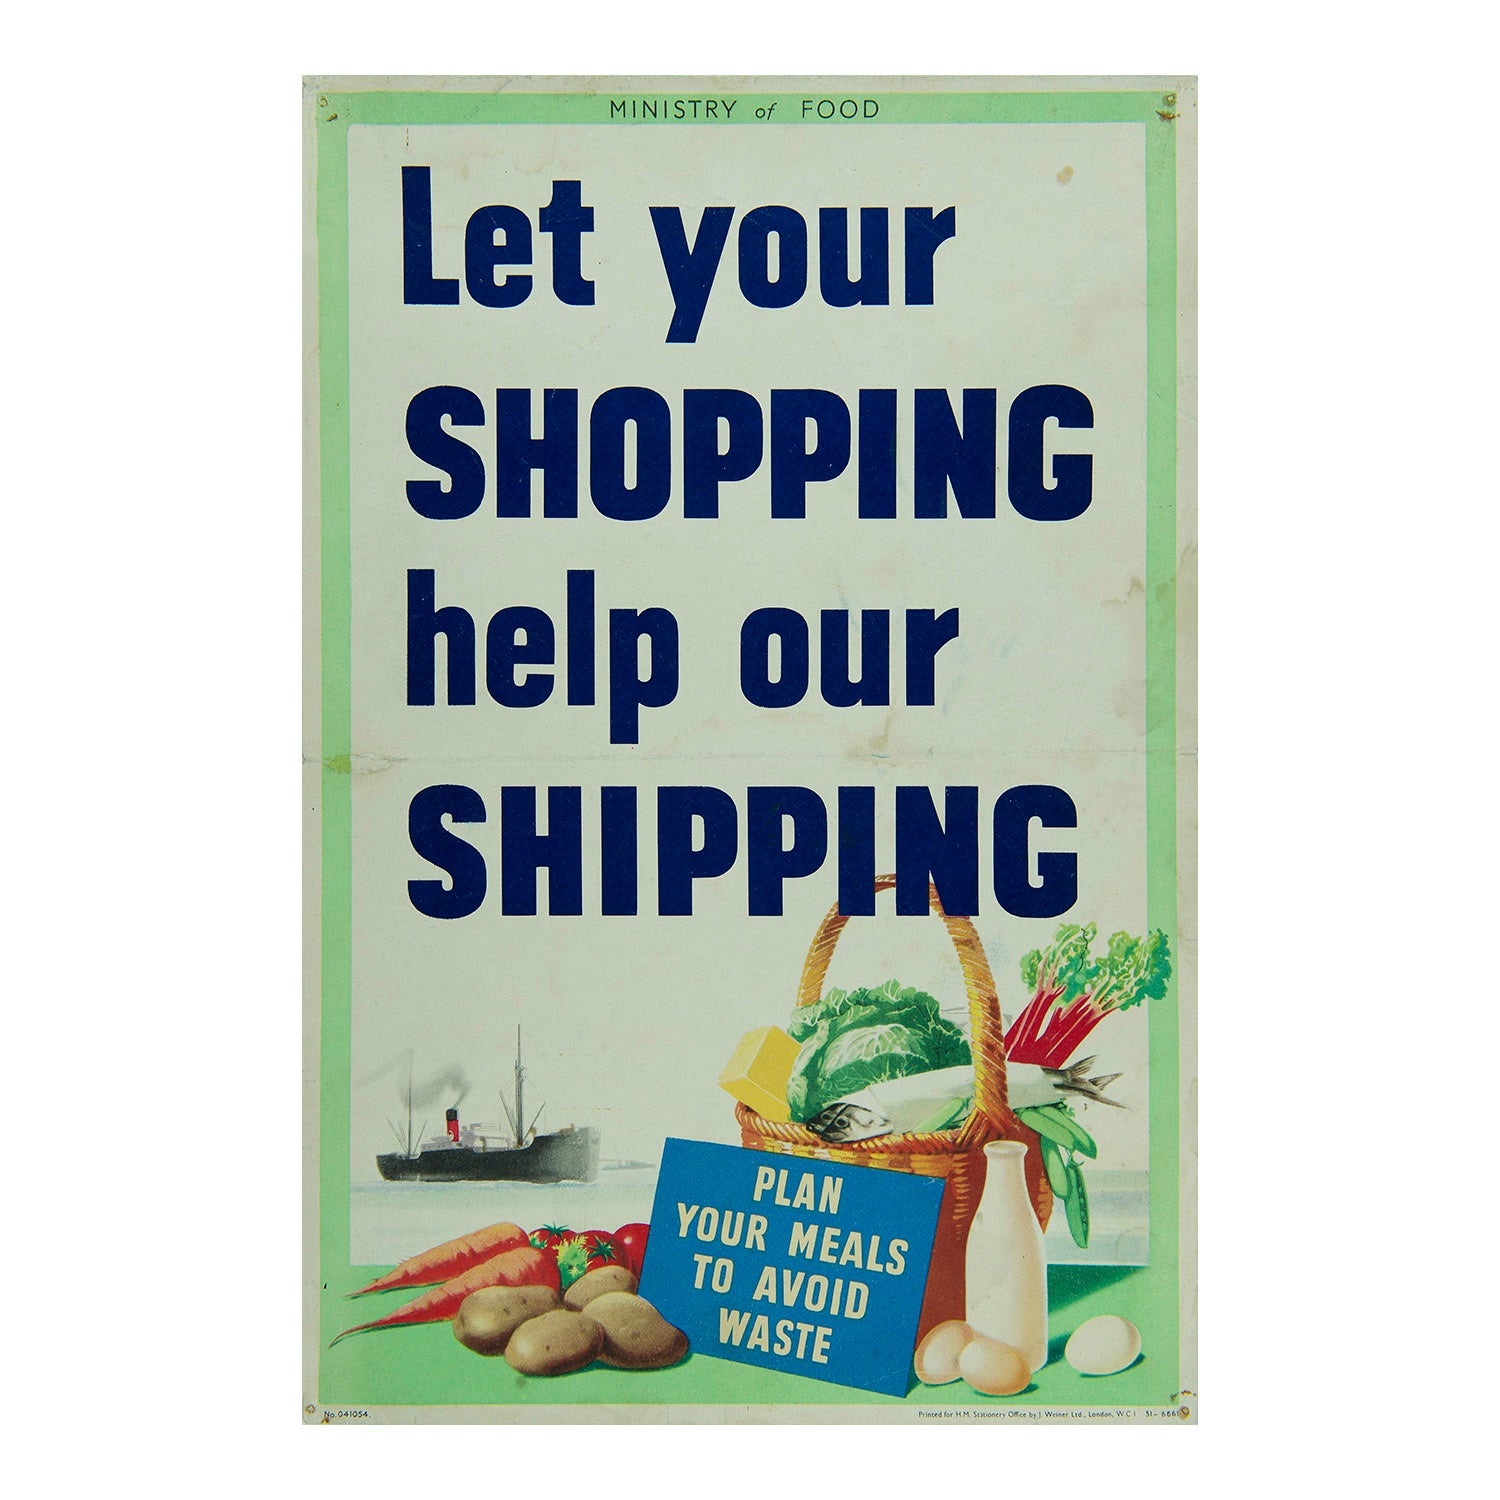 Let your shopping help our shipping